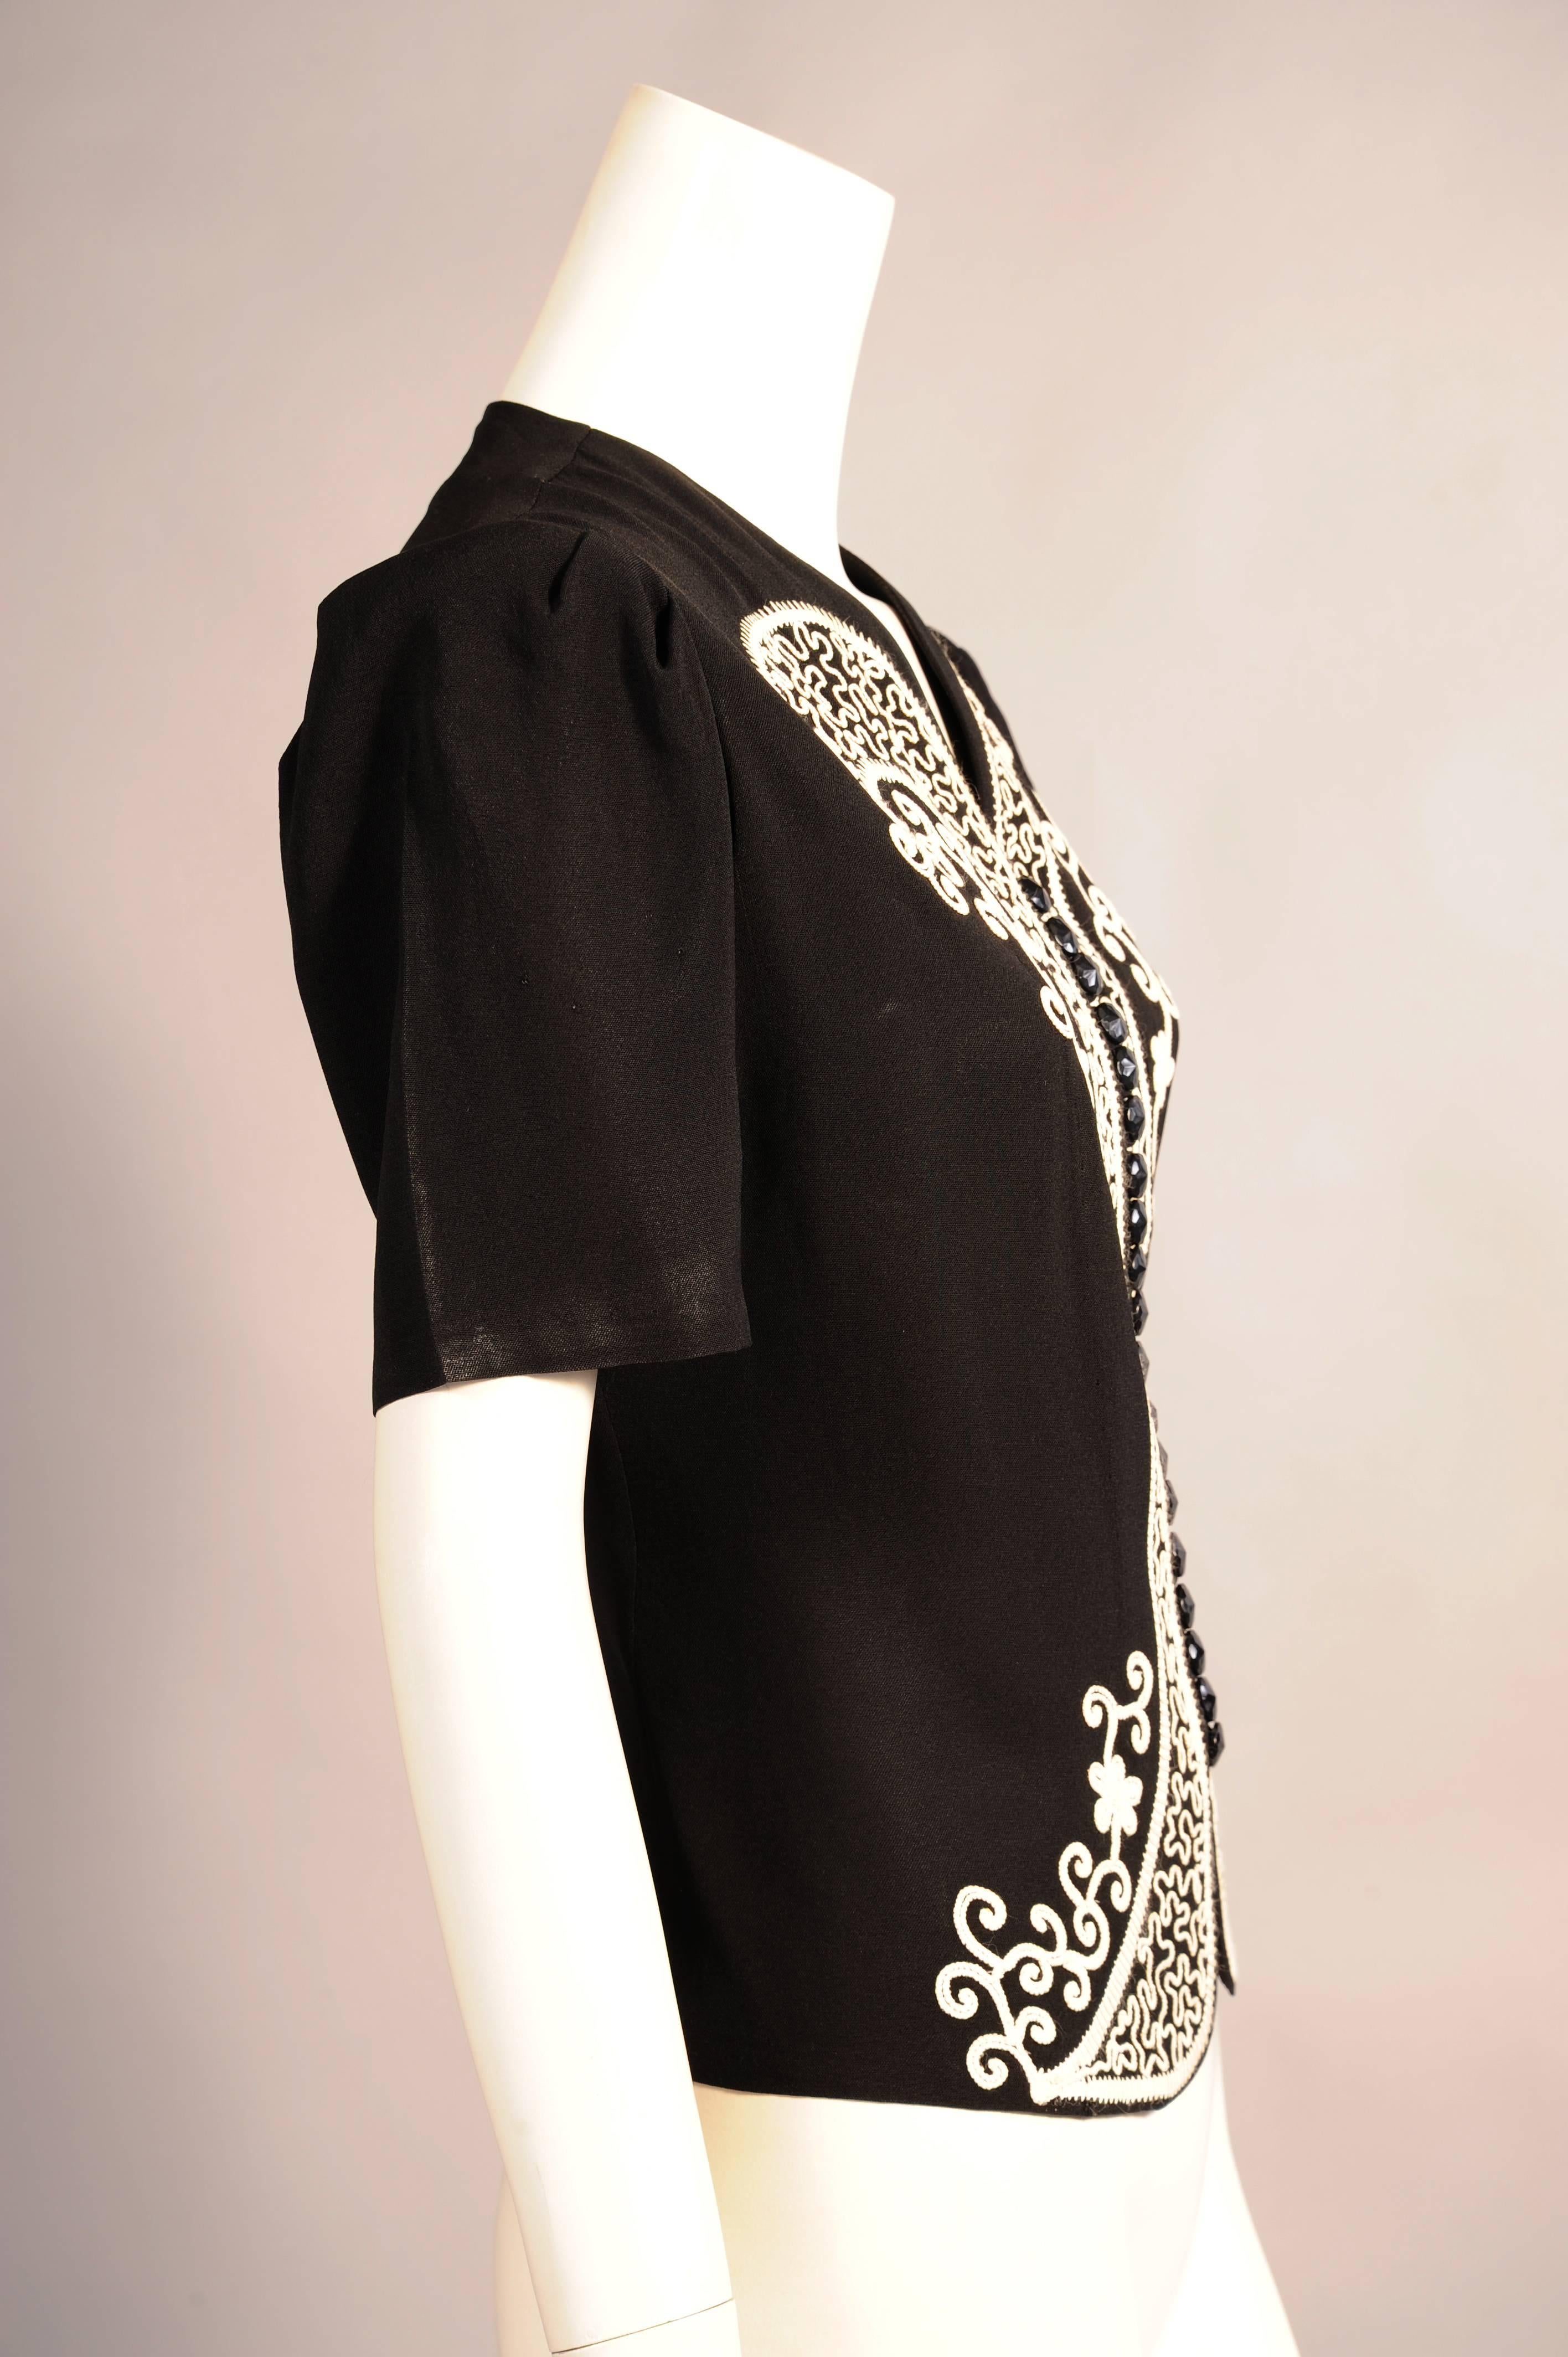 This short sleeved jacket black has lavish white soutache braid trim on both sides of the center front. In between there is a row of twenty black jet buttons with fabric loops.  This graphic jacket is in excellent